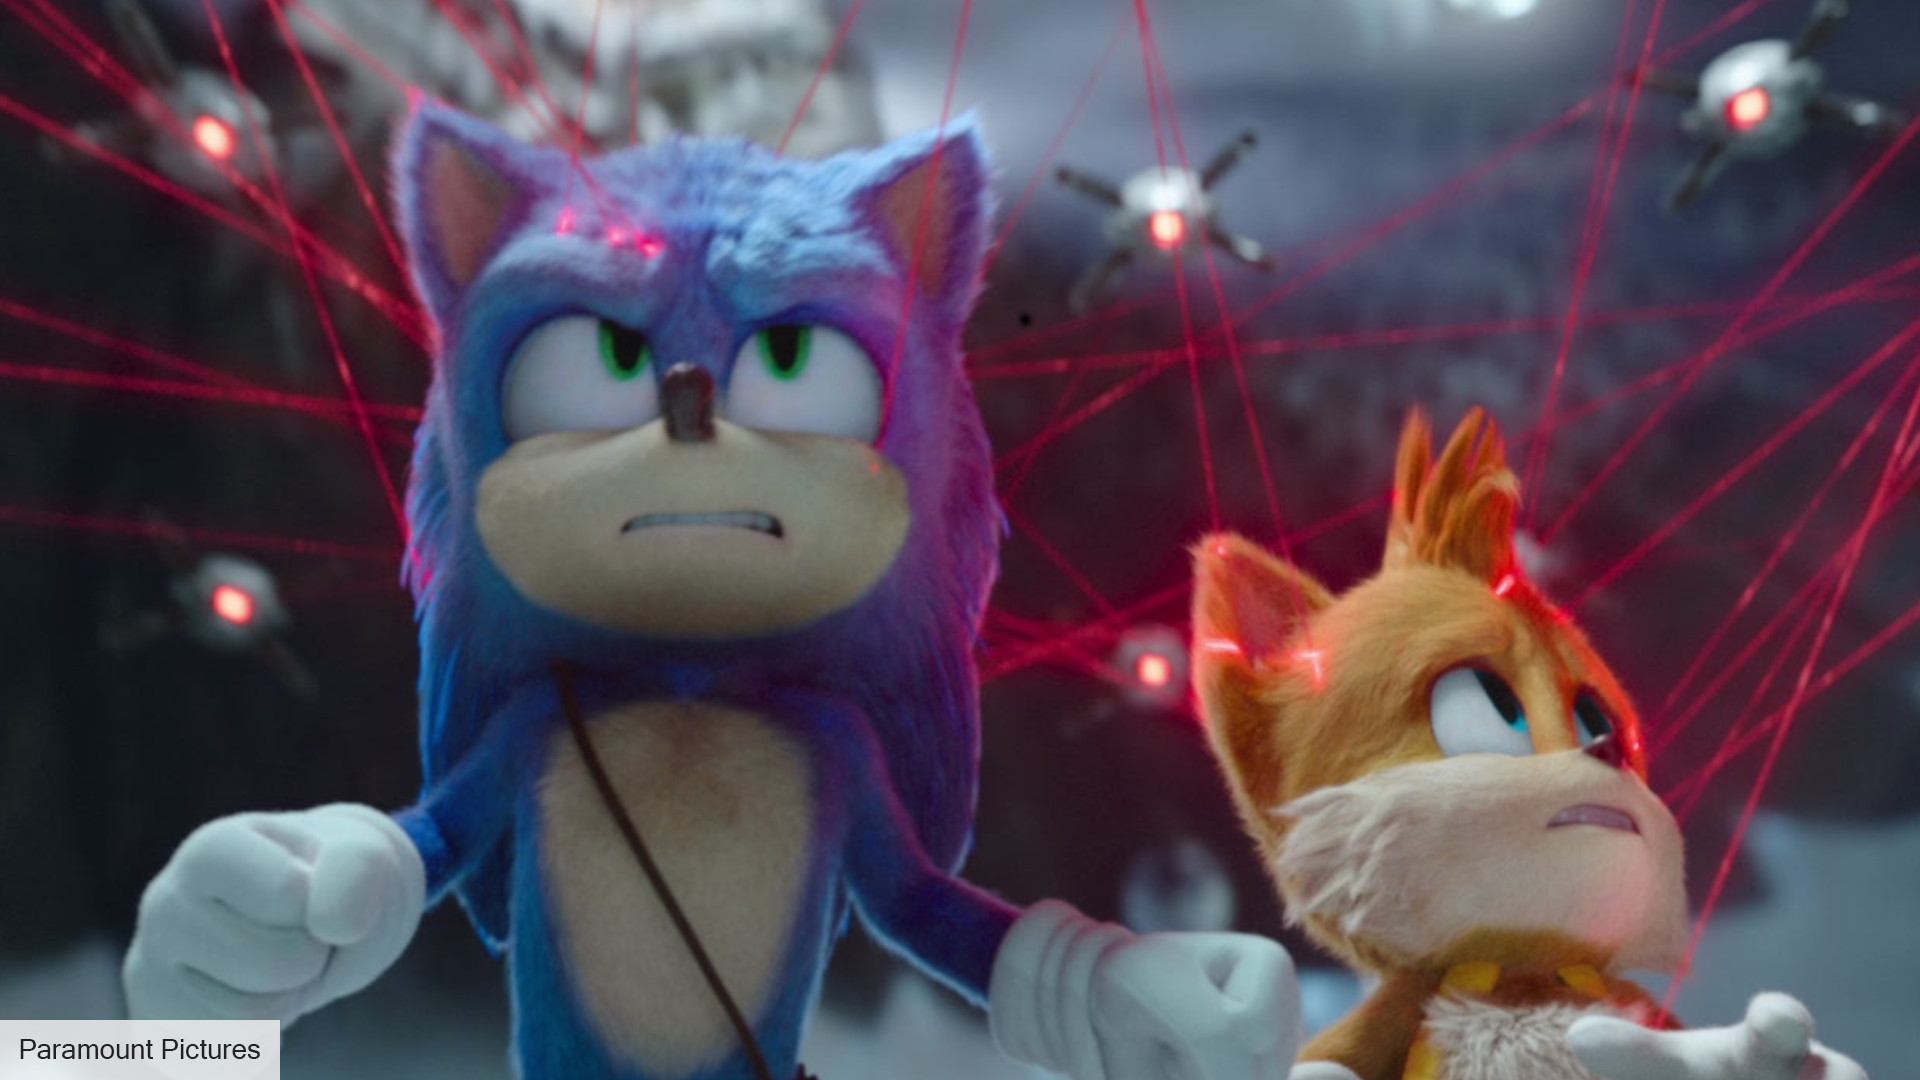 Sonic the Hedgehog 3 release date, cast, plot, and more news